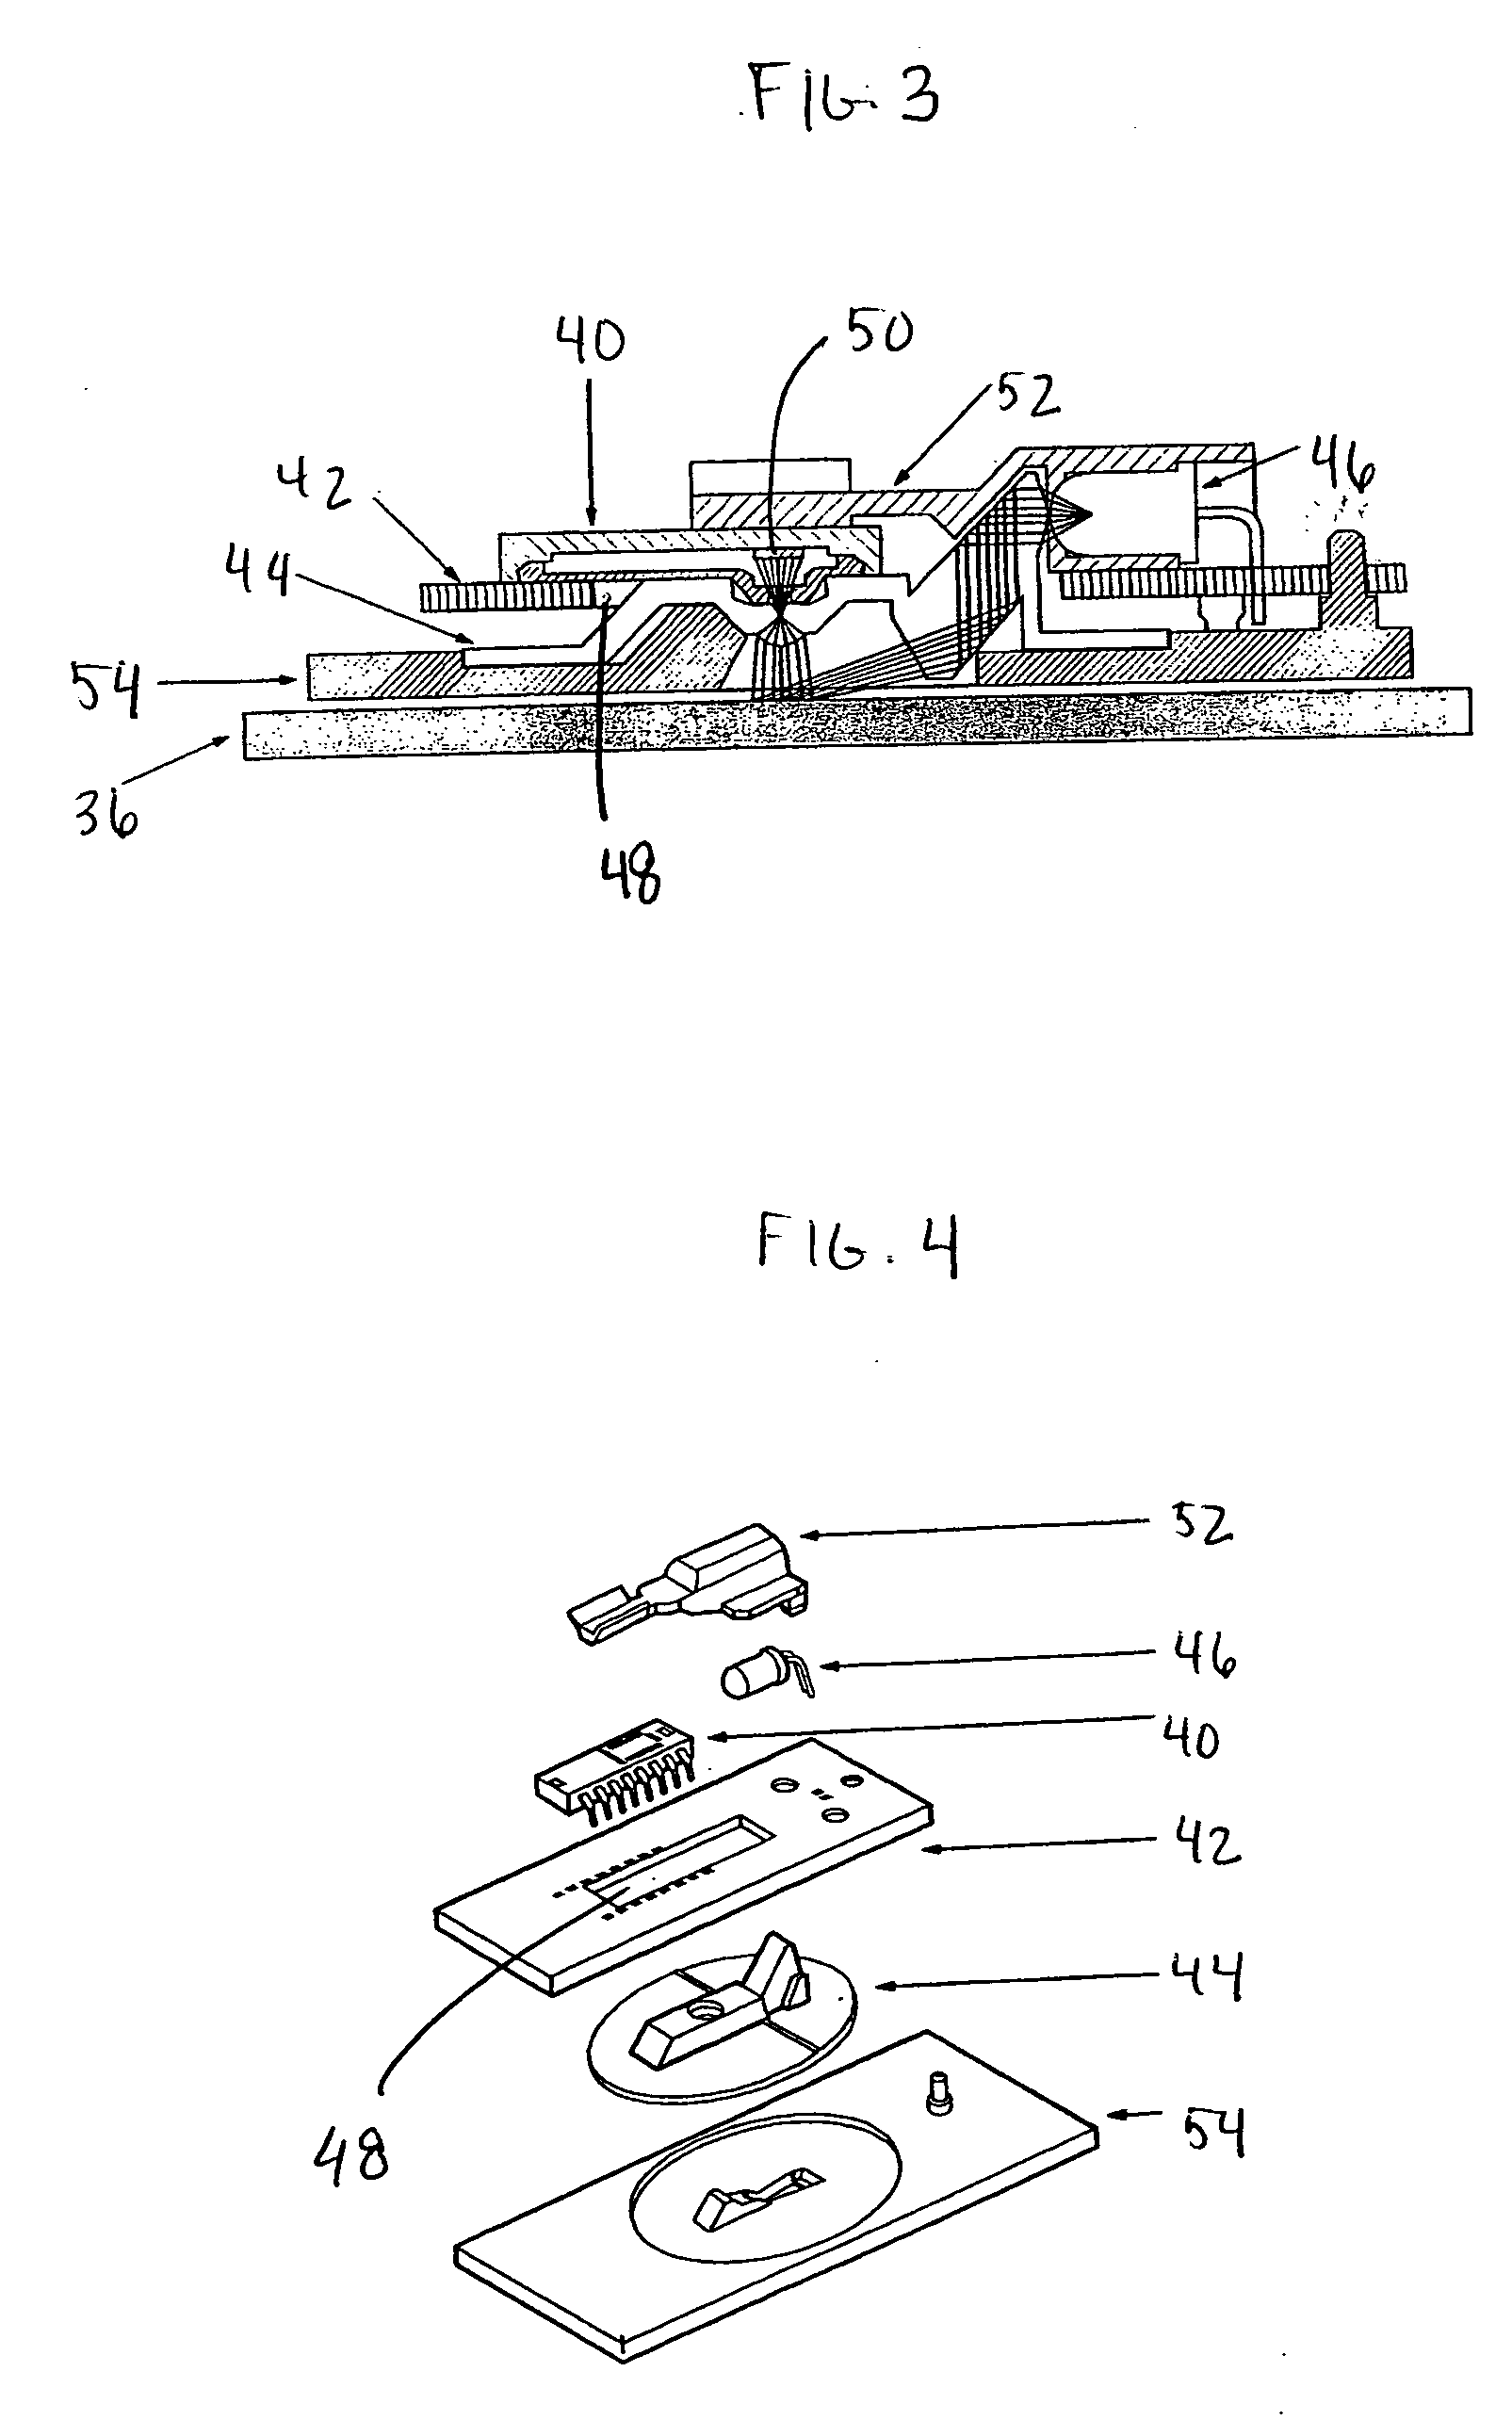 Apparatus and method for using optical mouse engine to determine speed, direction, position of scanned device and to obtain quantitative or qualitative data from same